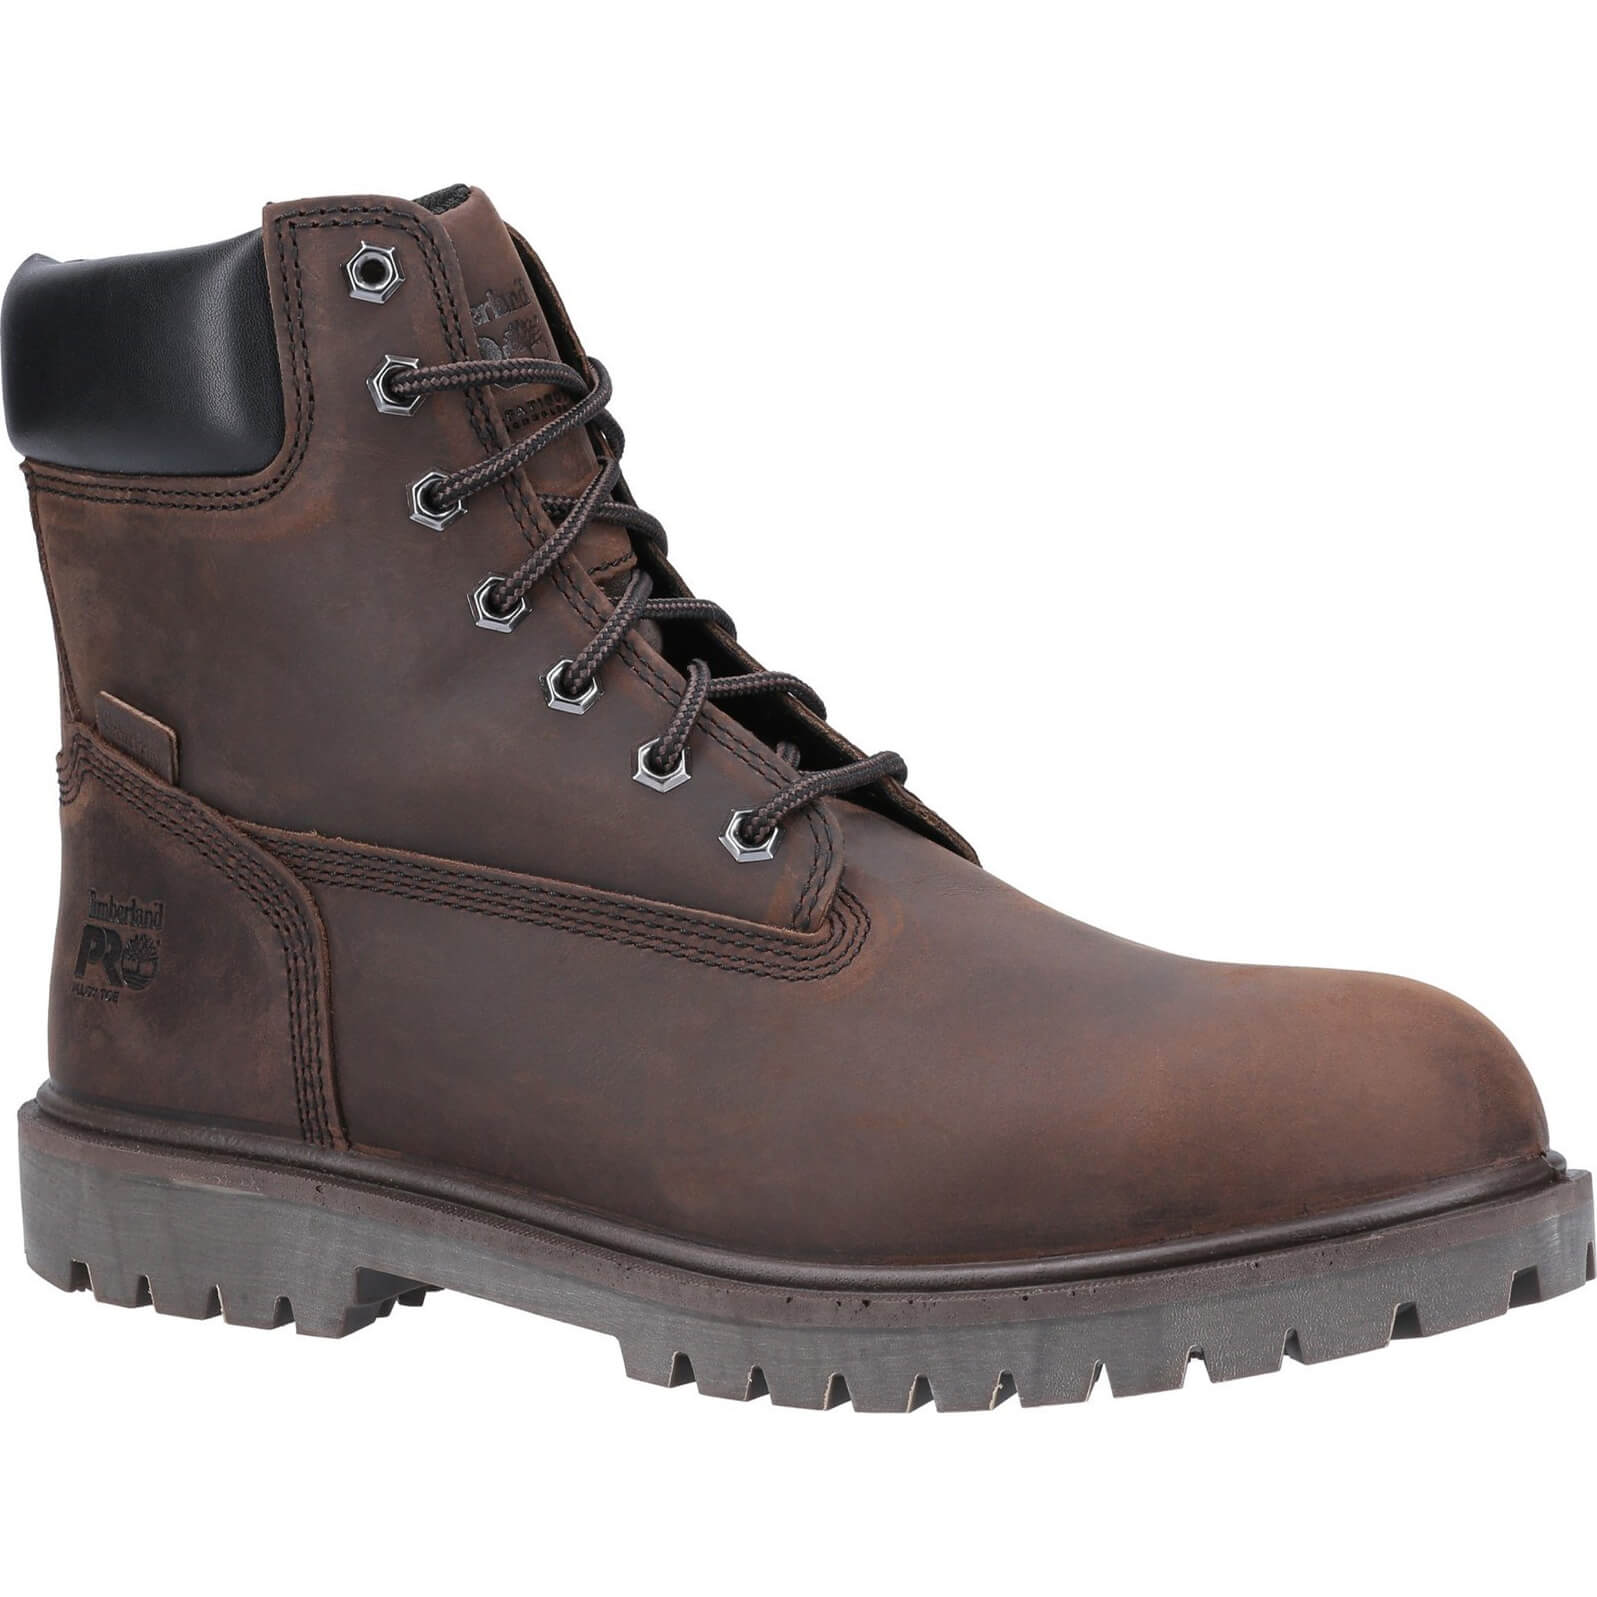 Image of Timberland Pro Iconic Safety Toe Work Boot Brown Size 6.5